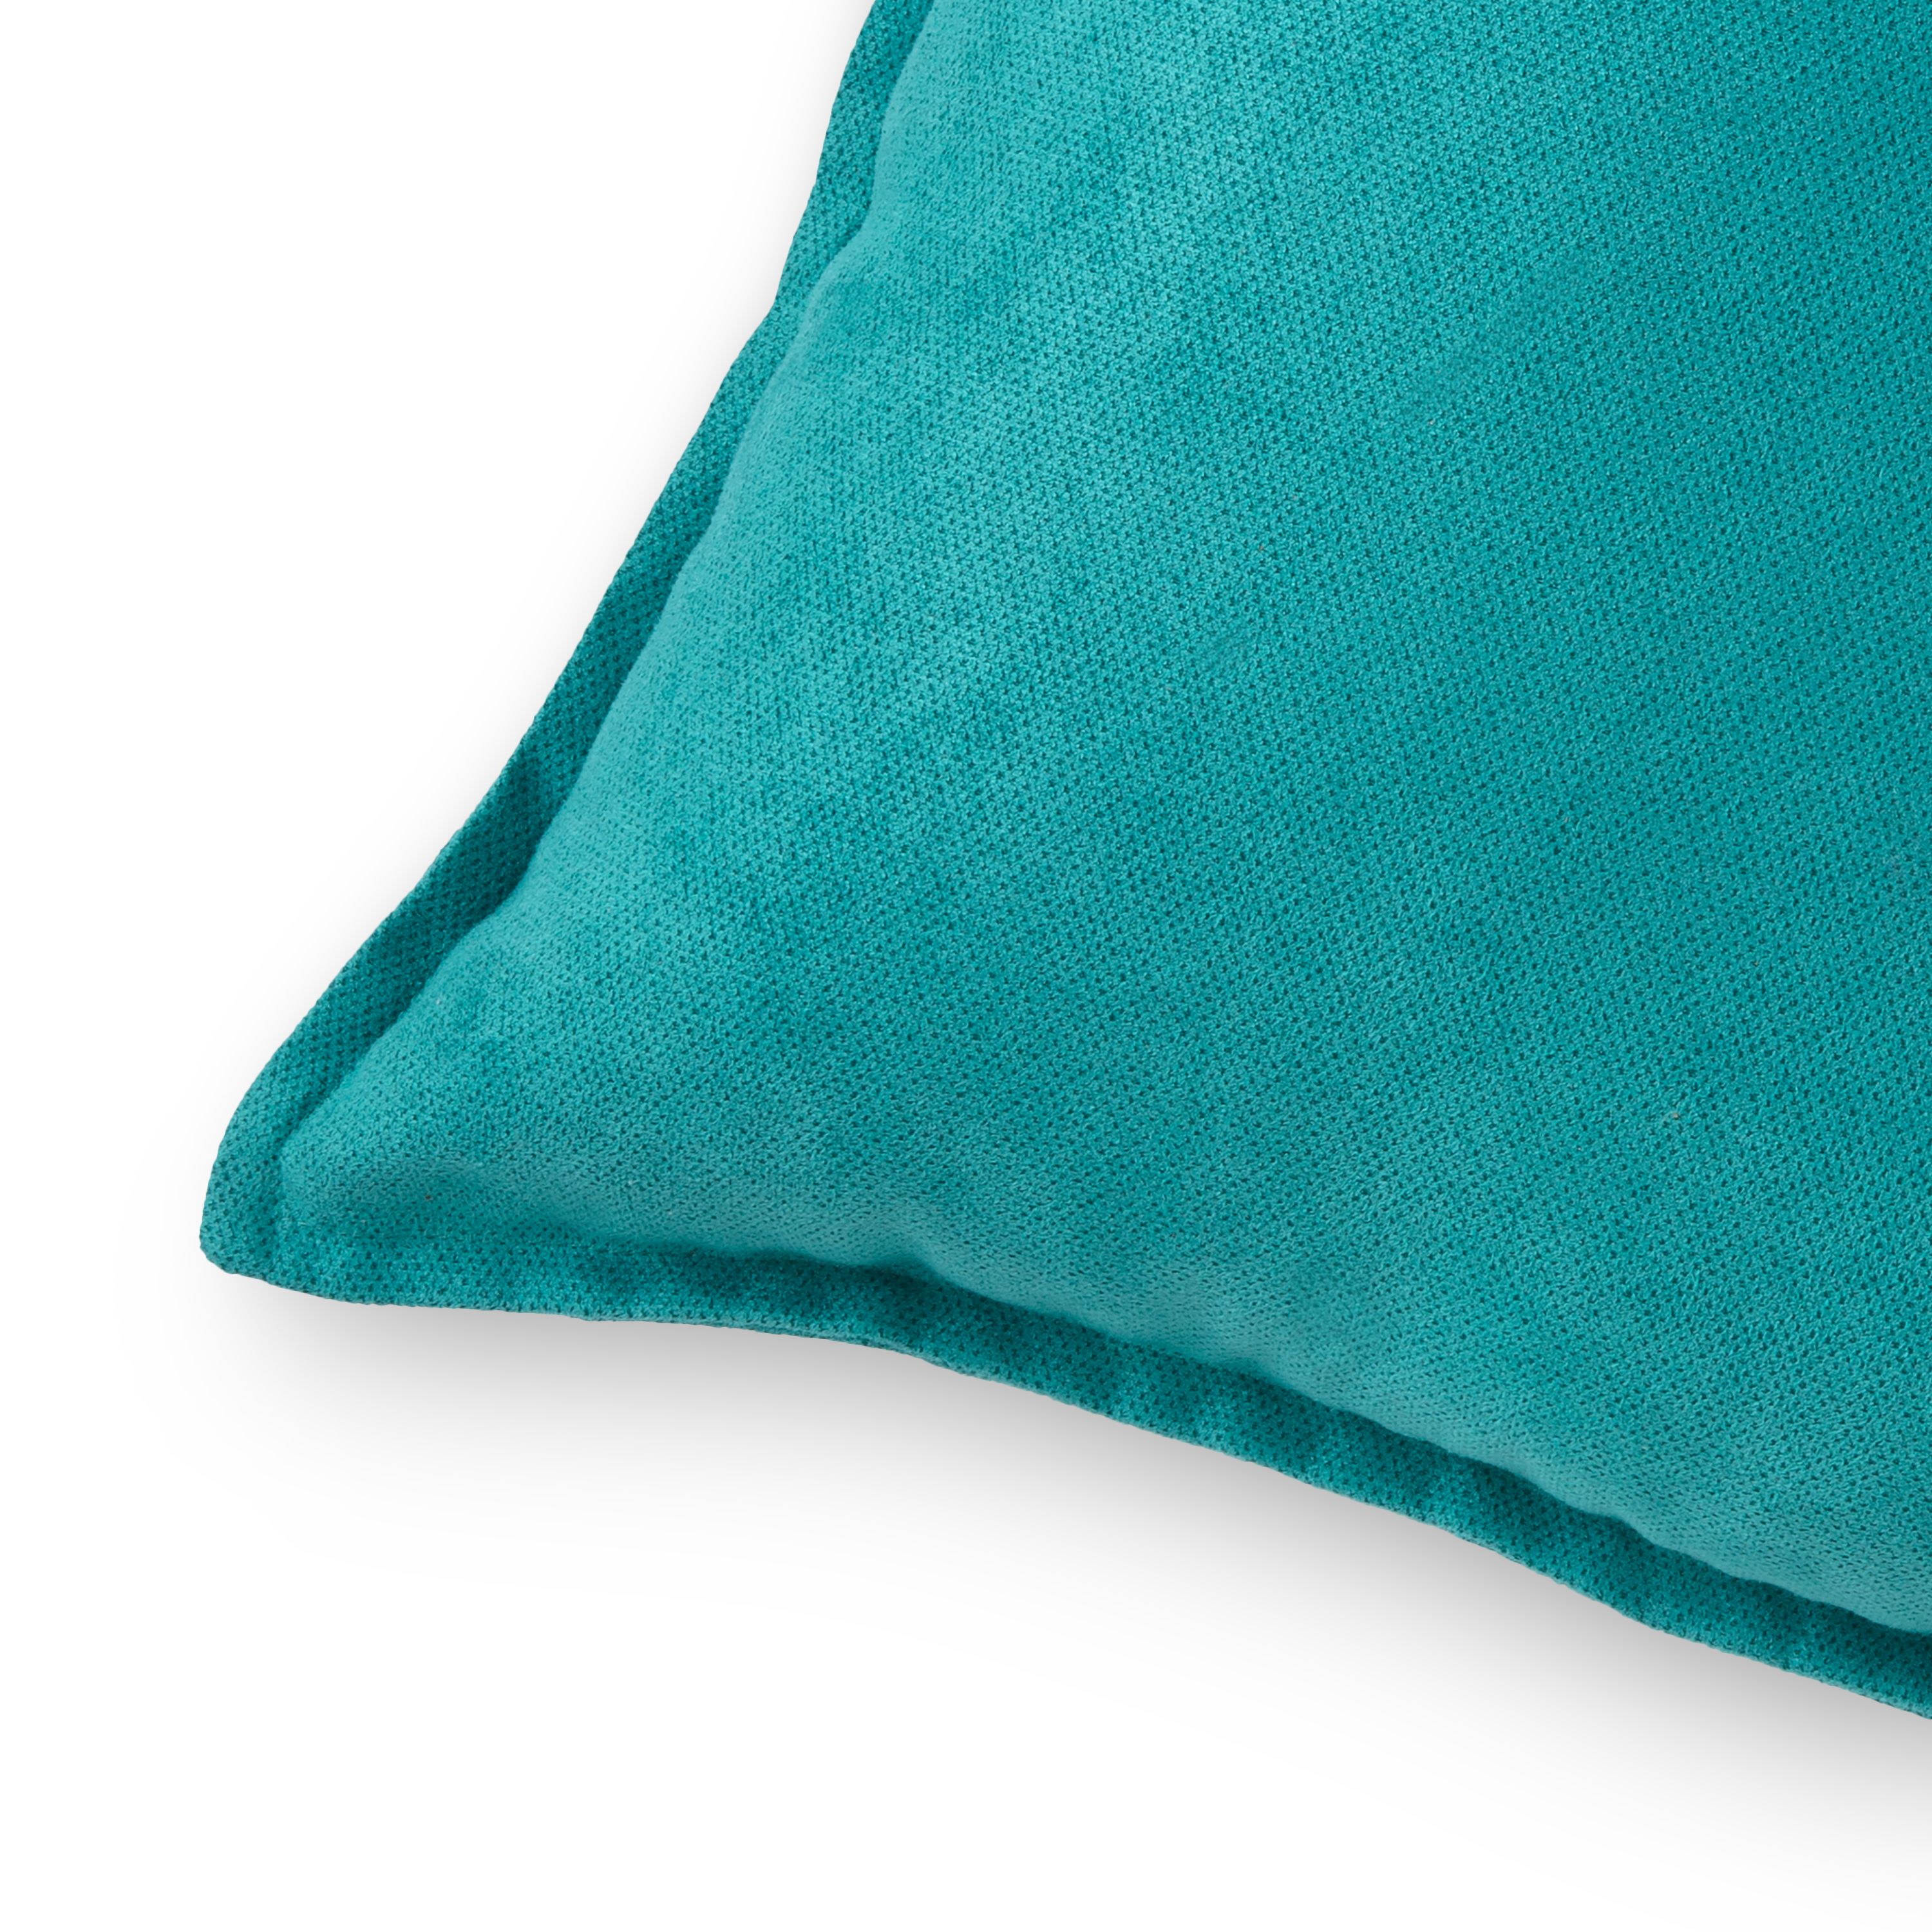 Mainstays Faux Suede Decorative Square Throw Pillow with Flange, 18" x 18", Peacock - image 3 of 4